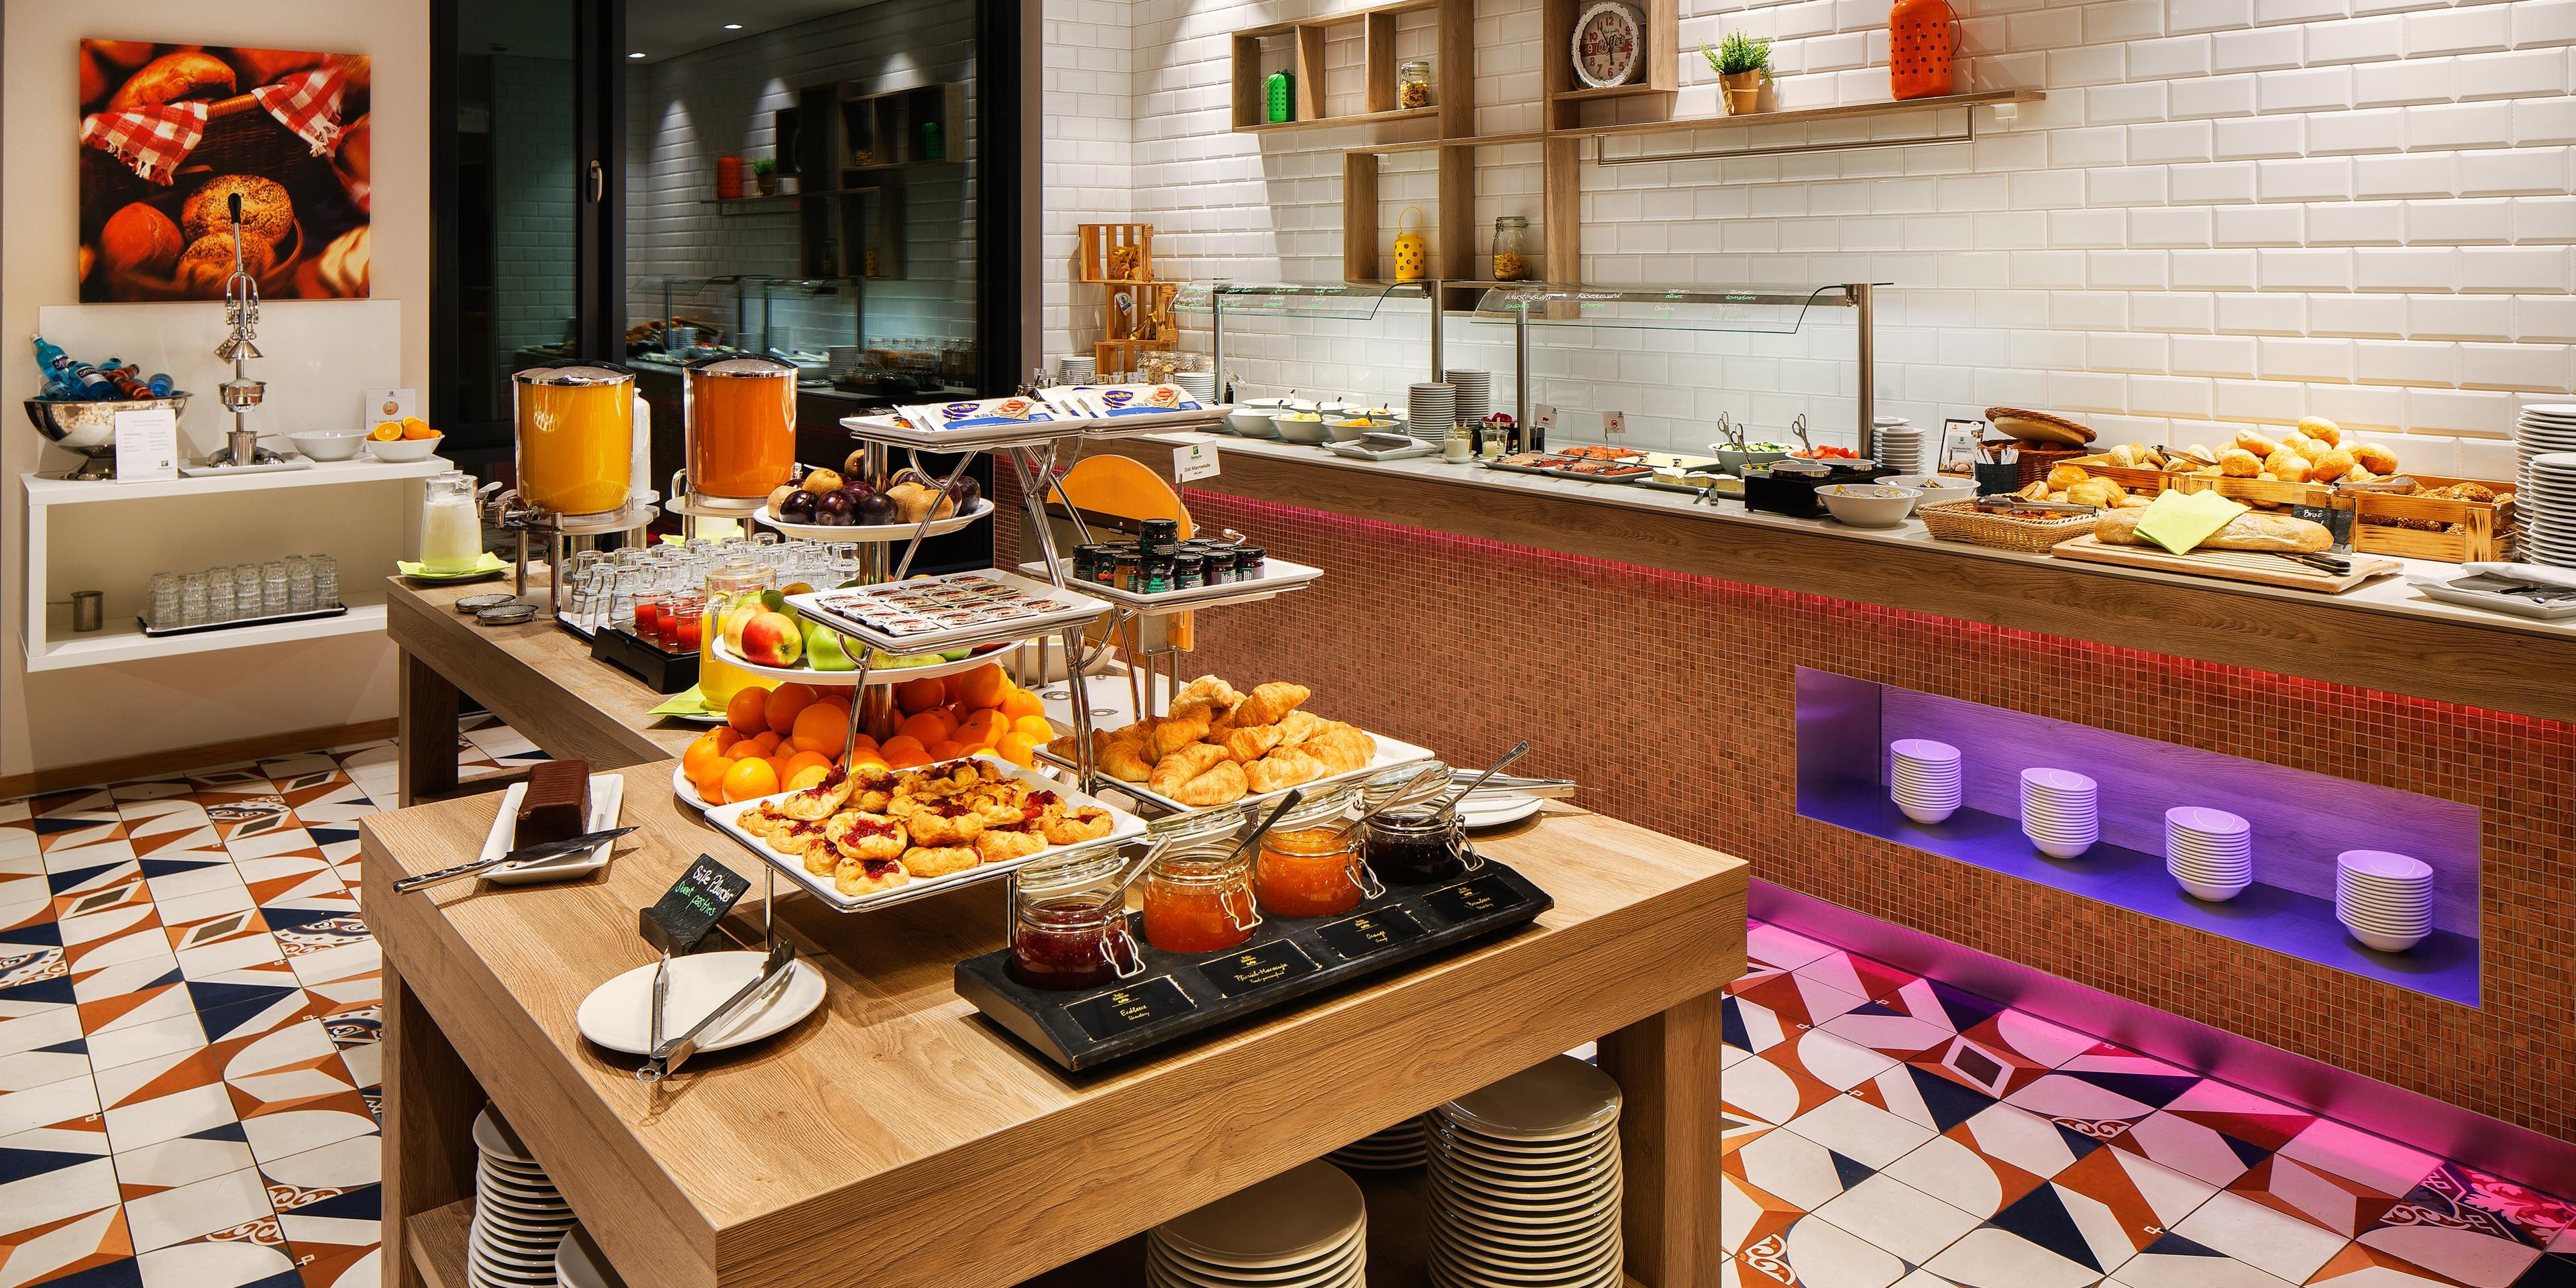 Freshly prepared choices from the buffet breakfast.